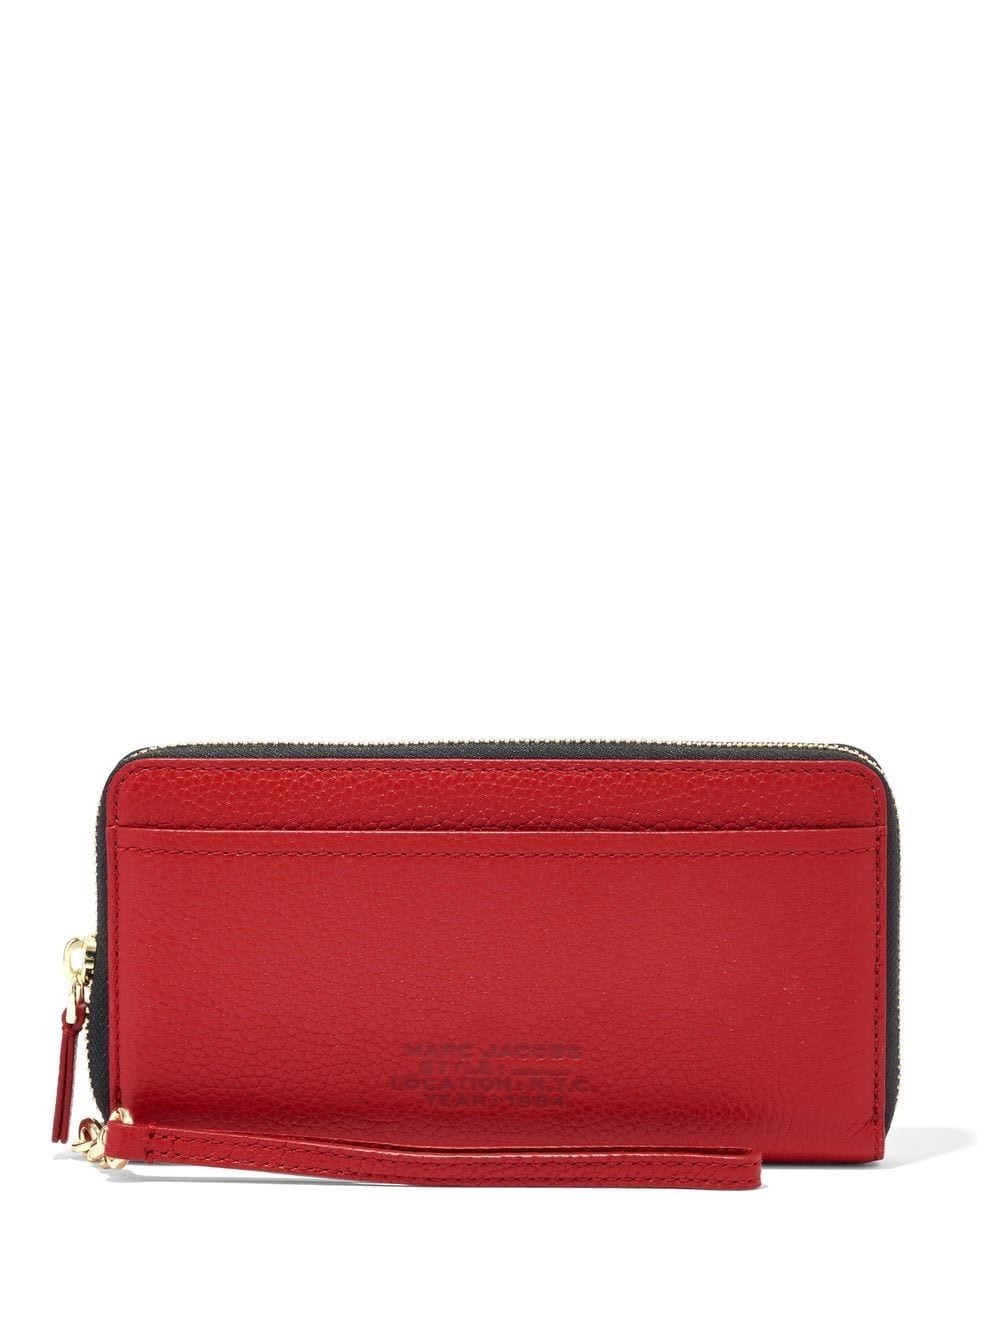 MARC JACOBS THE CONTINENTAL WALLET